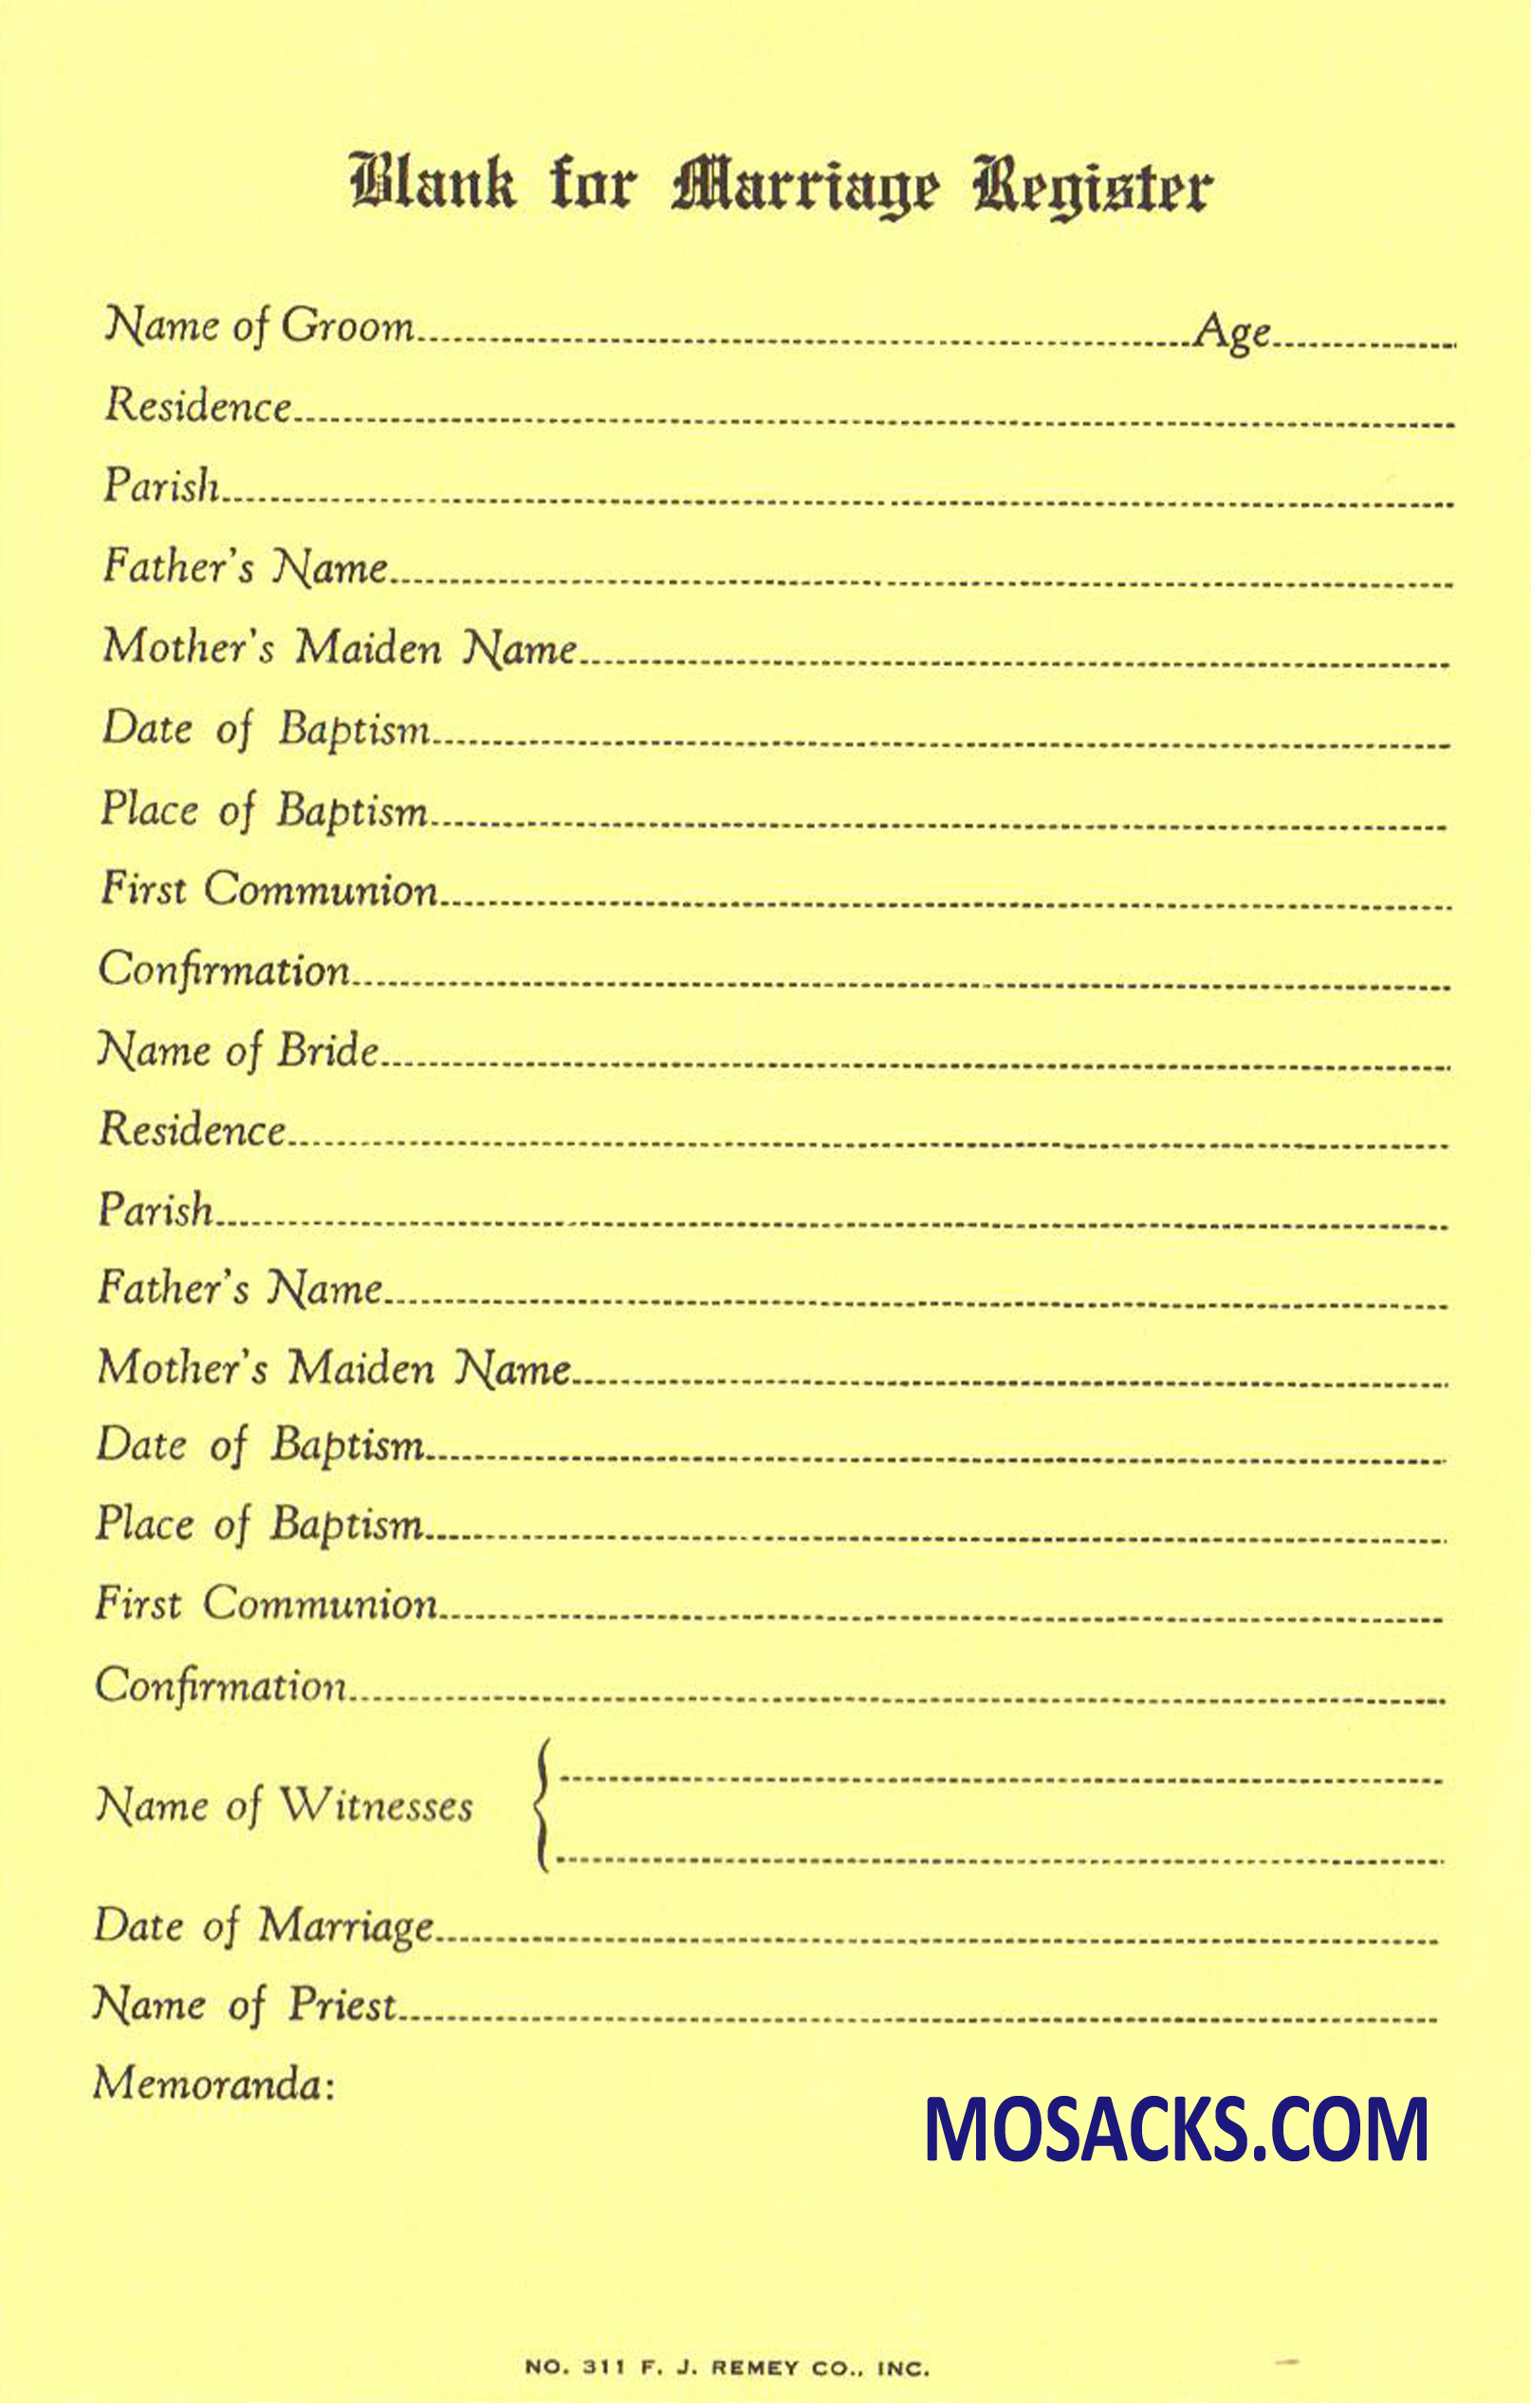 Marriage Register Blanks No.311